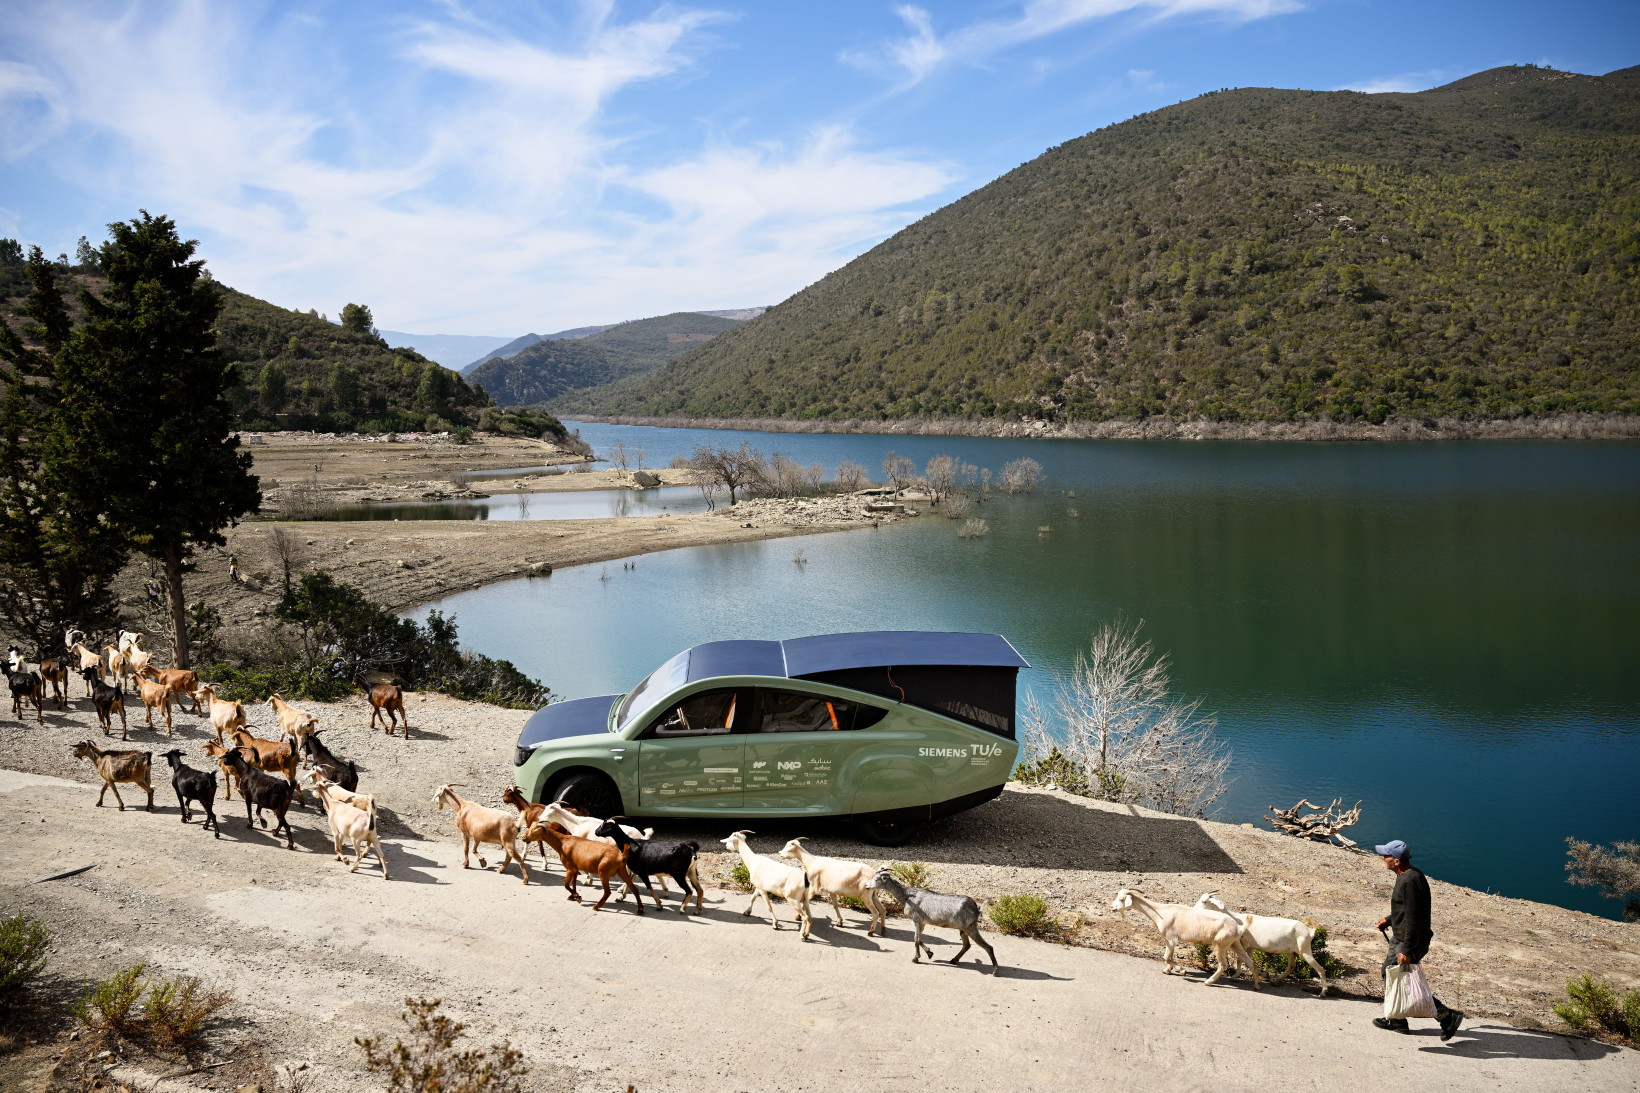 a solar car parked next to a lake in morocco